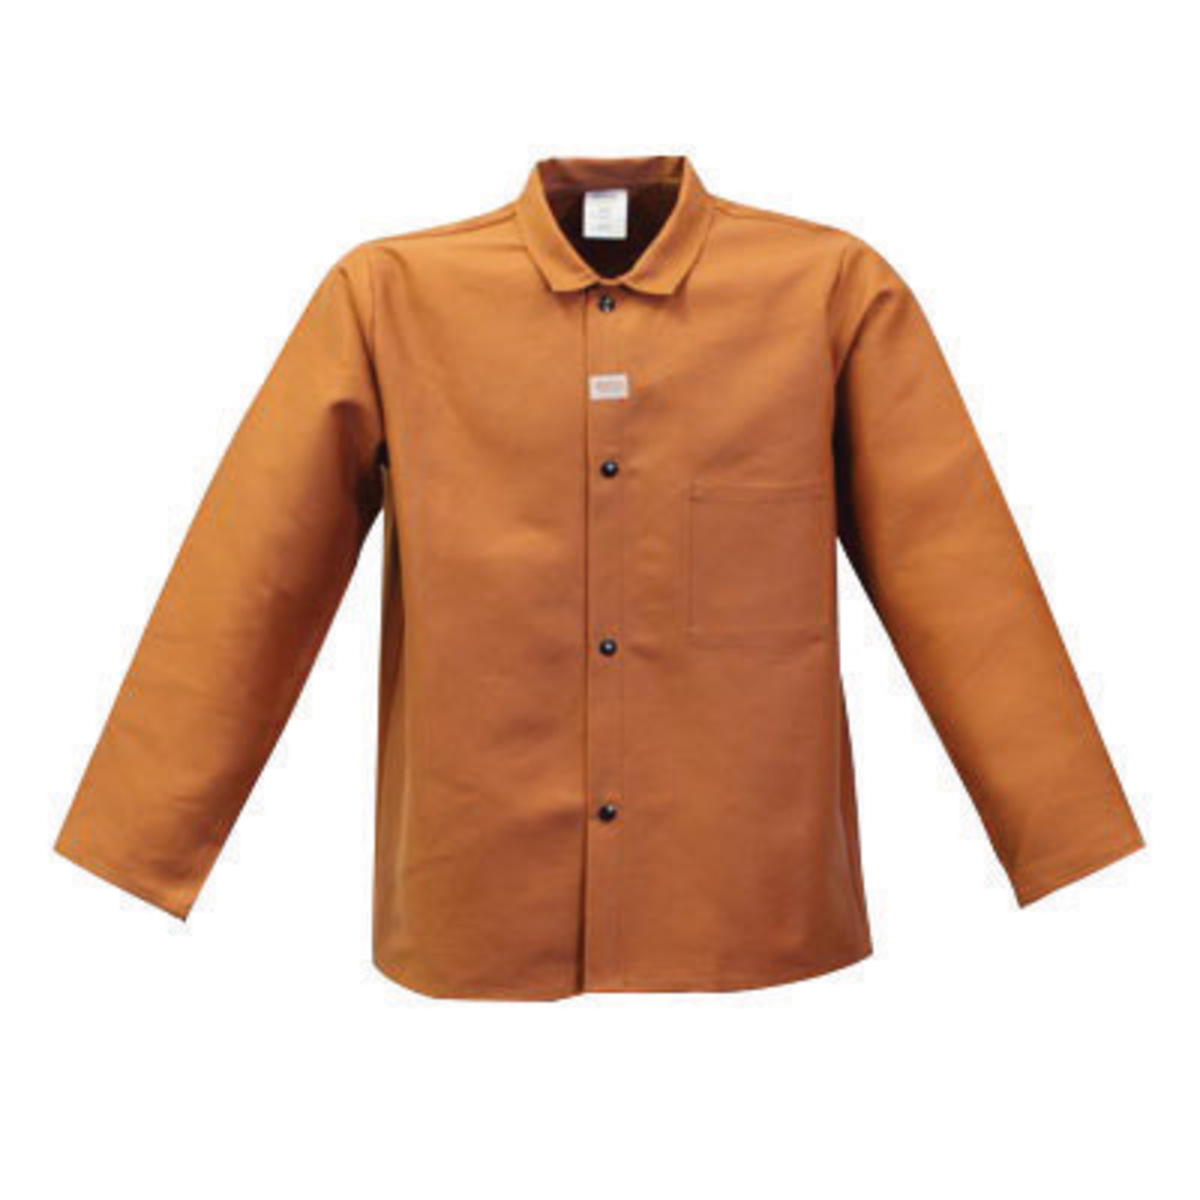 Stanco Safety Products™ Large Rust Brown Cotton Flame Resistant Welding Jacket With Snap Closure And Leather Sleeves